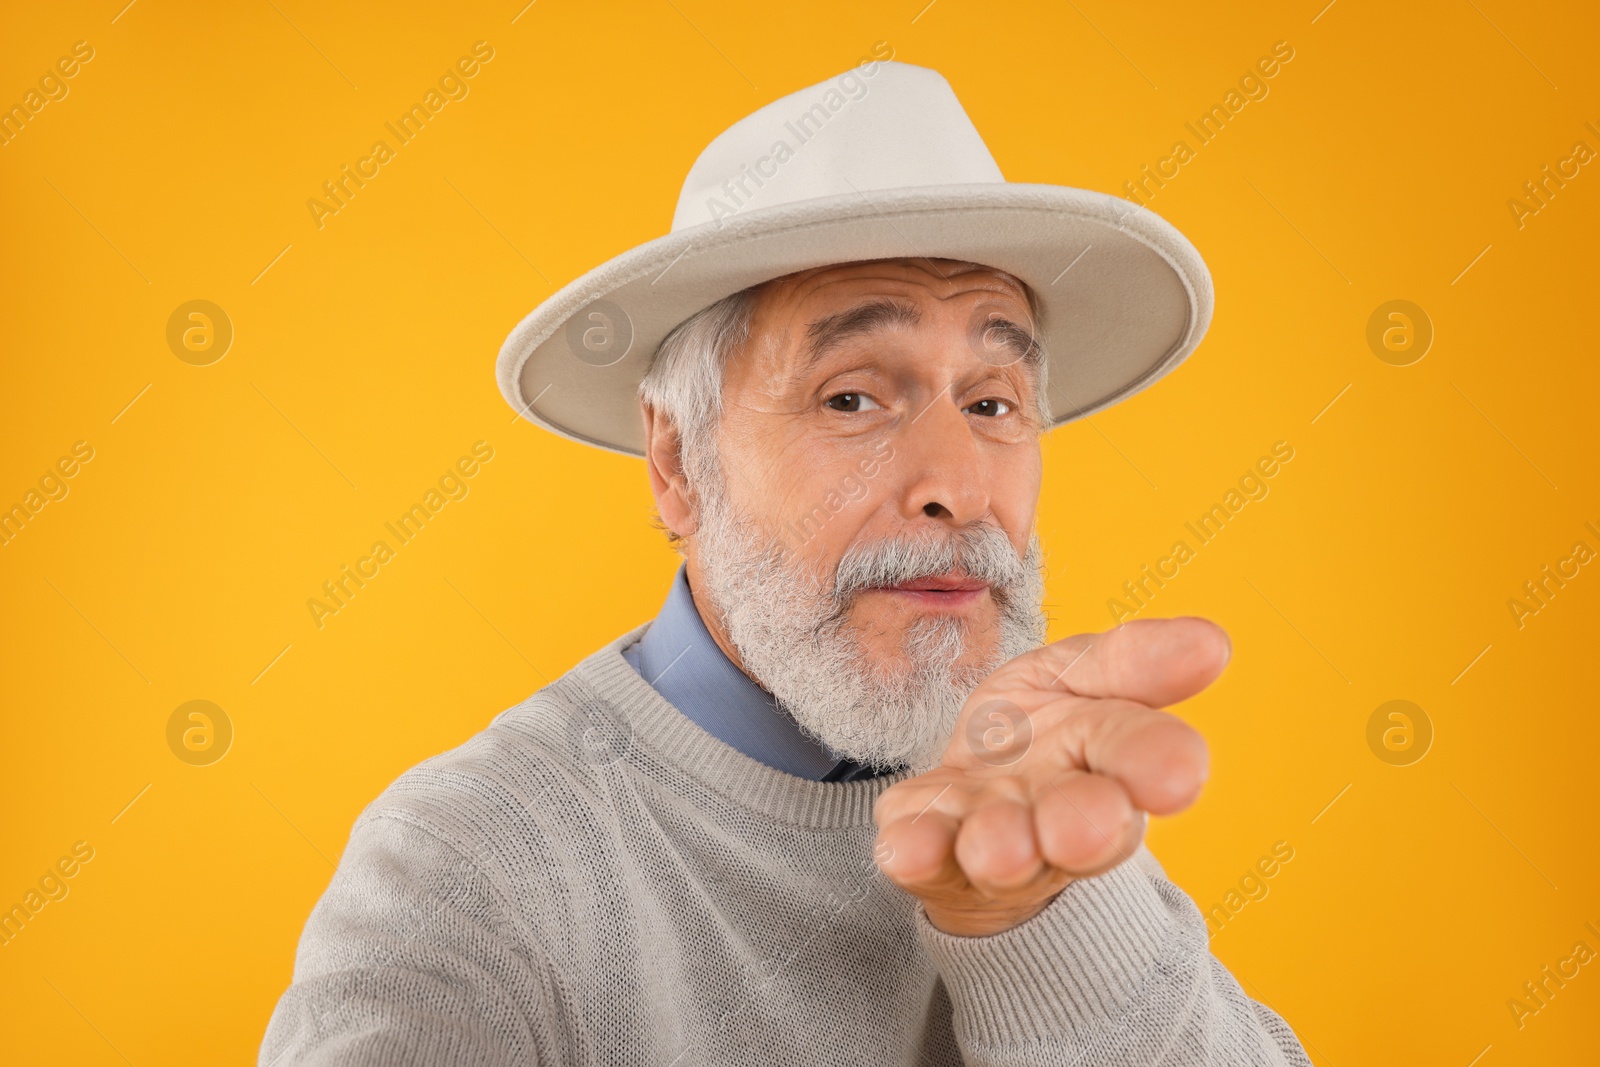 Photo of Senior man blowing kiss on yellow background